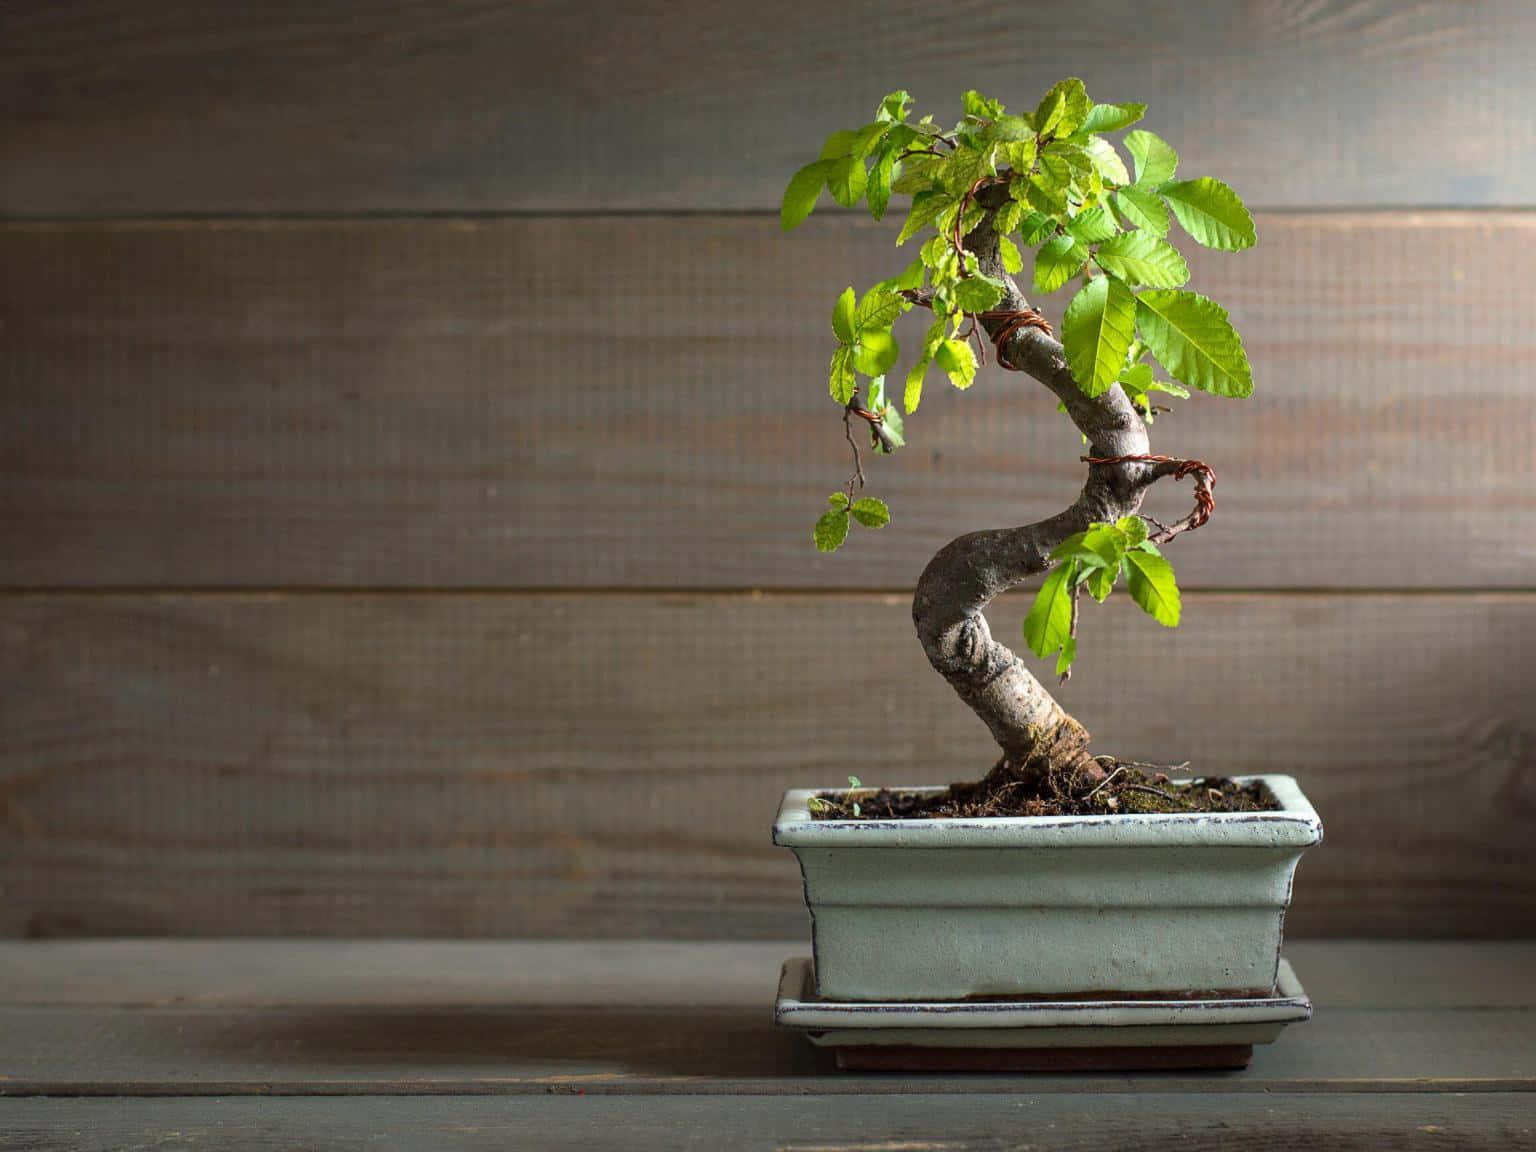 A Small Bonsai Tree In A Pot On A Wooden Table